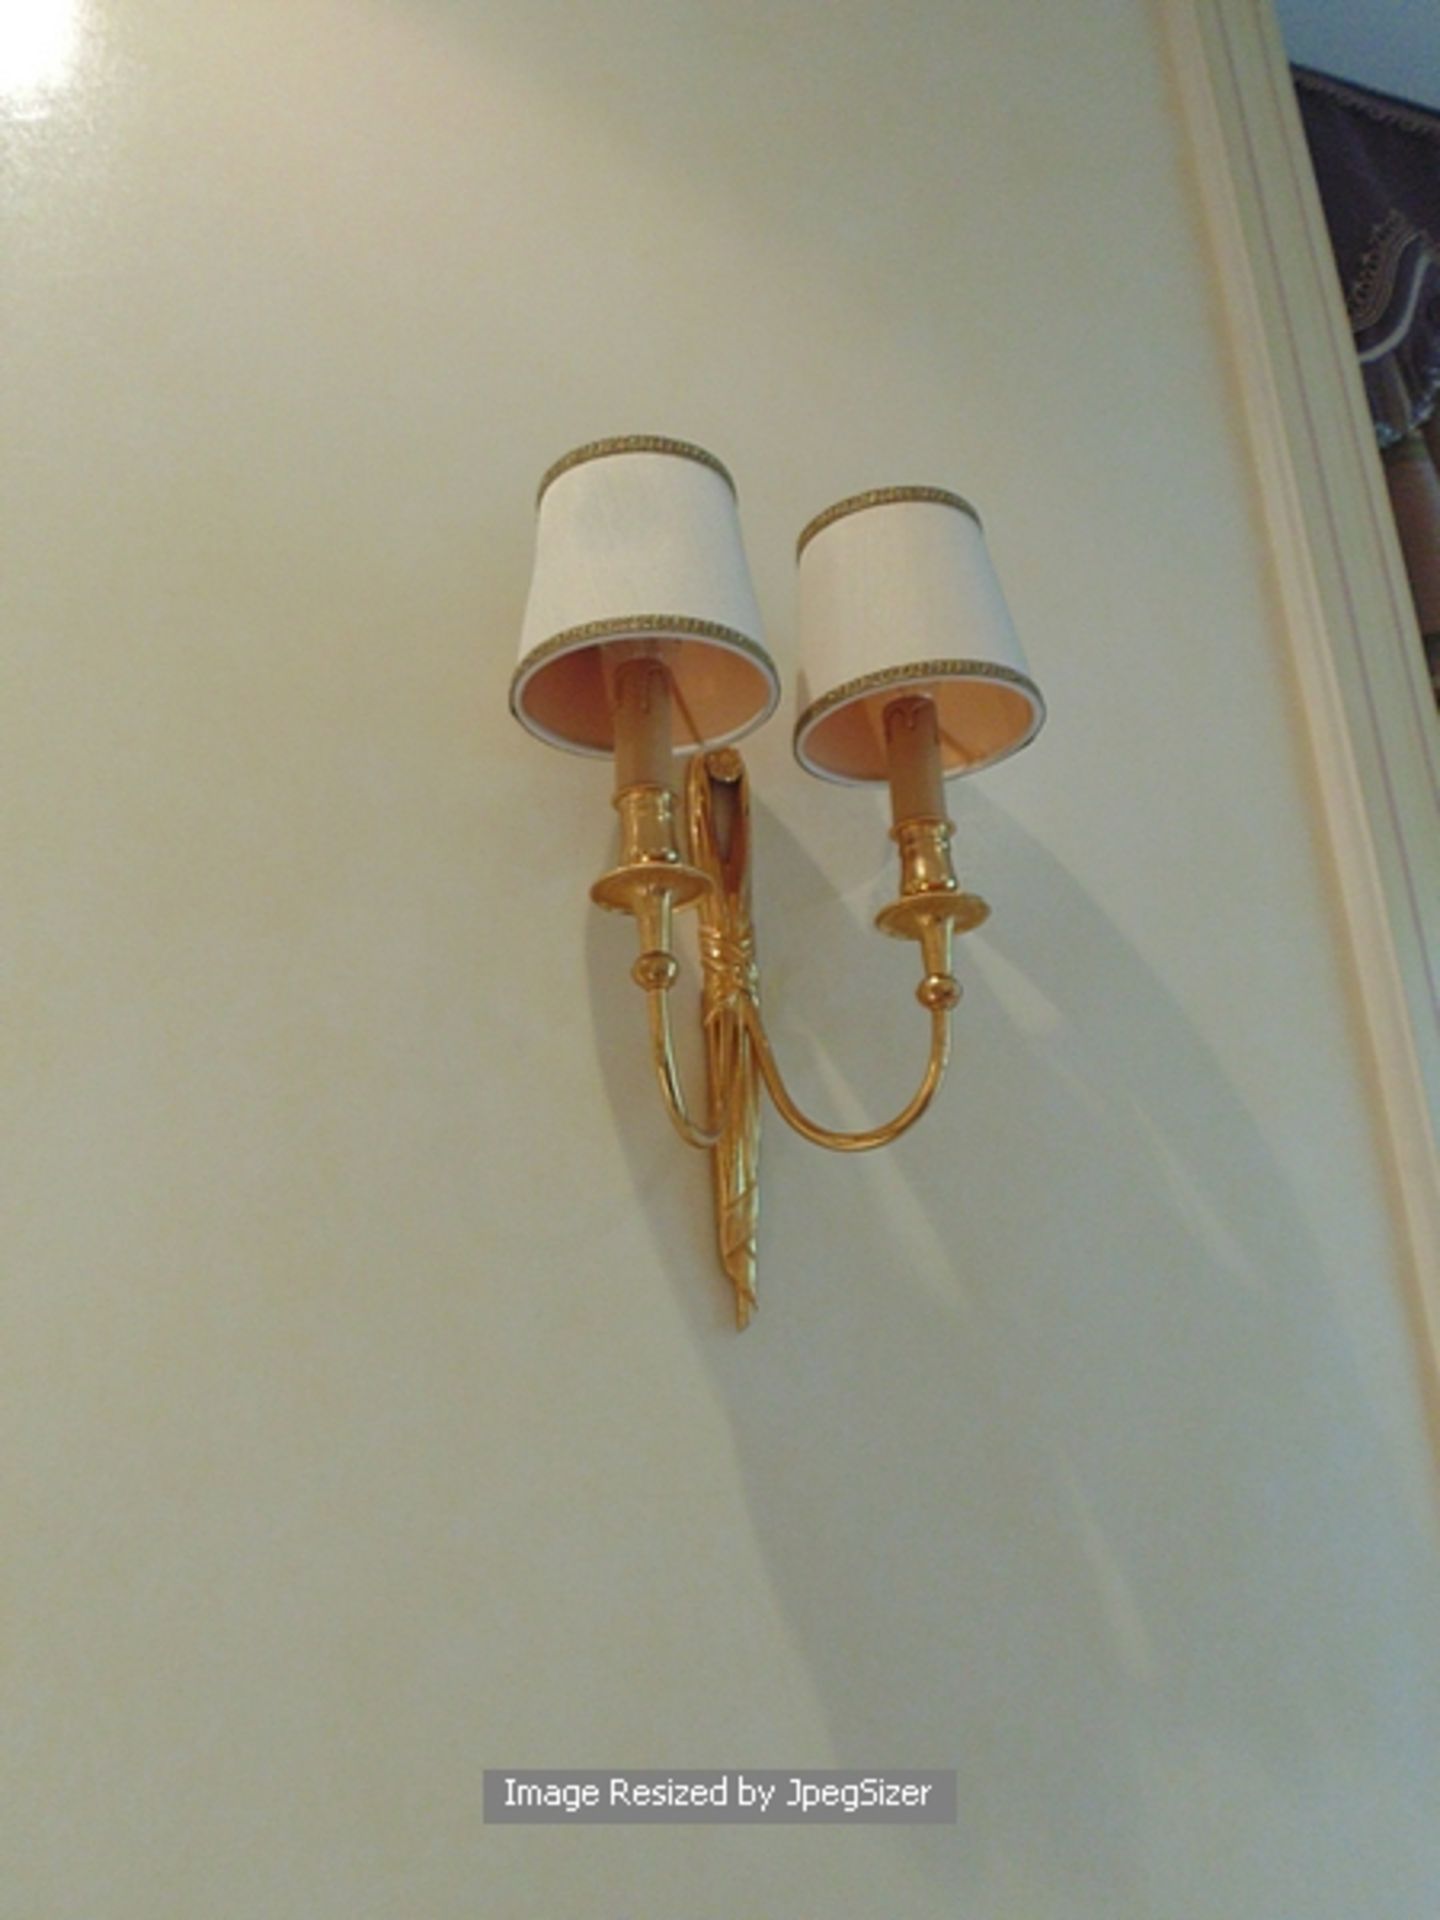 A pair of Laudarte 2 candle wall sconces T.150 pattern wall light, bronze castings gold 24K finish